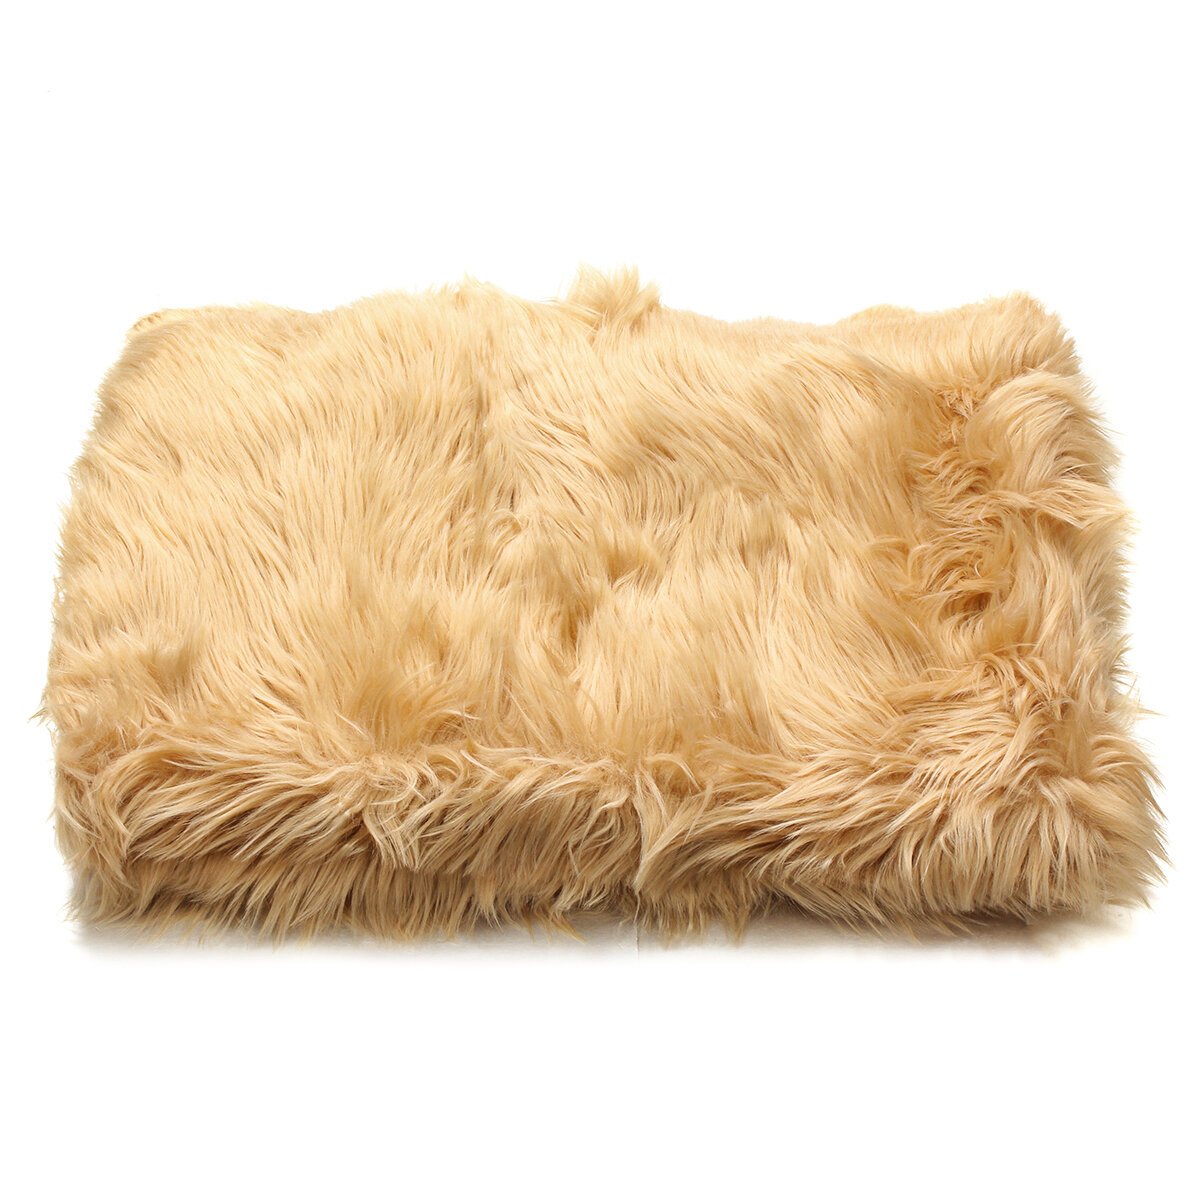 48x32 inch Faux Fur Fluffy Wool Rug Mat Hairy Rectangle Carpet Shaggy Area Rug Bedroom Living Dining Room Carpet Warm Mat Sofas Chair Floor Cushions